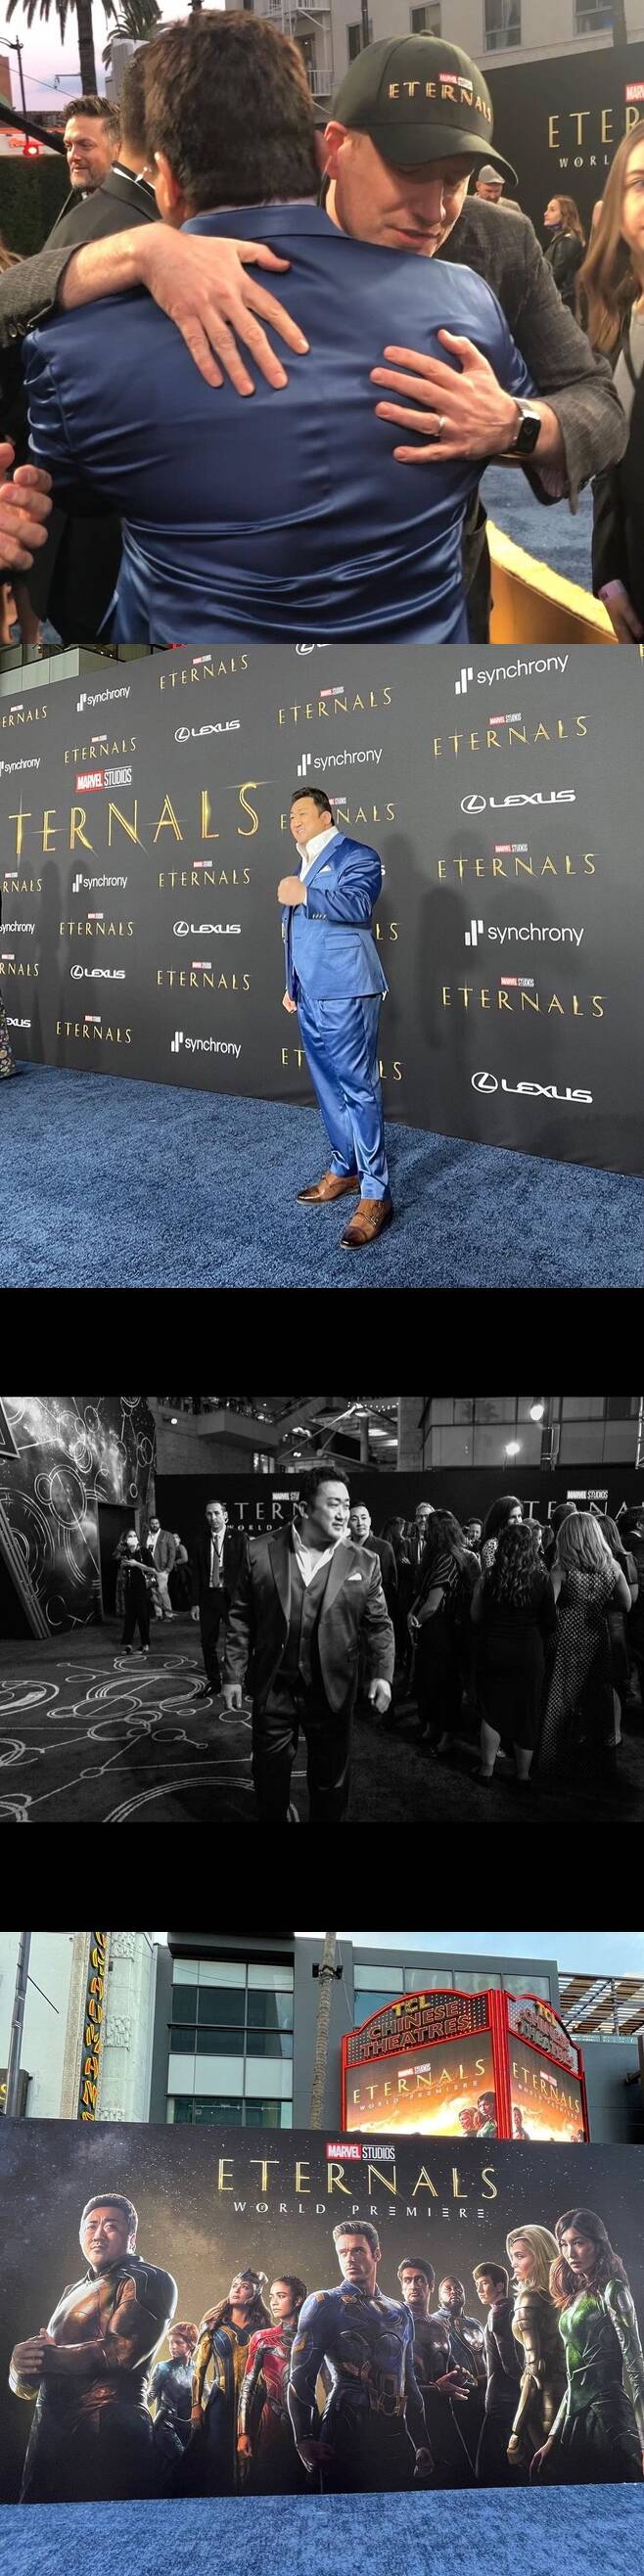 Actor Ma Dong-Seok has released behind-the-scenes photos of her attending the World Premiere at United States of America ahead of the release of the film The Eternals.Ma Dong-Seok released several photos on his instagram on the 25th with an article entitled World Premier.Ma Dong-Seok in the photo is attending the world premiere scene of The Eternals recently held at United States of America.On this day, Ma Dong-Seok was scheduled to be released as a leading actor, introducing the character Gilgamesh of the movie The Eternals, which is about to be released with the lovers schedule.The appearance of the Premiere scene, where Ma Dong-Seok is hanging in a big way, also catches the eye.Ma Dong-Seok also shares a deep hug with Kevin Pigi, head of Marvel Studios, adding to the surprise of Korean fans of Ma Dong-Seok, who is about to debut as a global star.Meanwhile, The Eternals is a film about the story of immortal hero who has lived without revealing himself for thousands of years, joining forces again to confront the oldest enemy of mankind, Deviants, after Avengers: Endgame.Ma Dong-Seok played Gilgamesh, one of the main roles in this work, and worked with Angelina Jolie.The Eternals will be released on November 3.